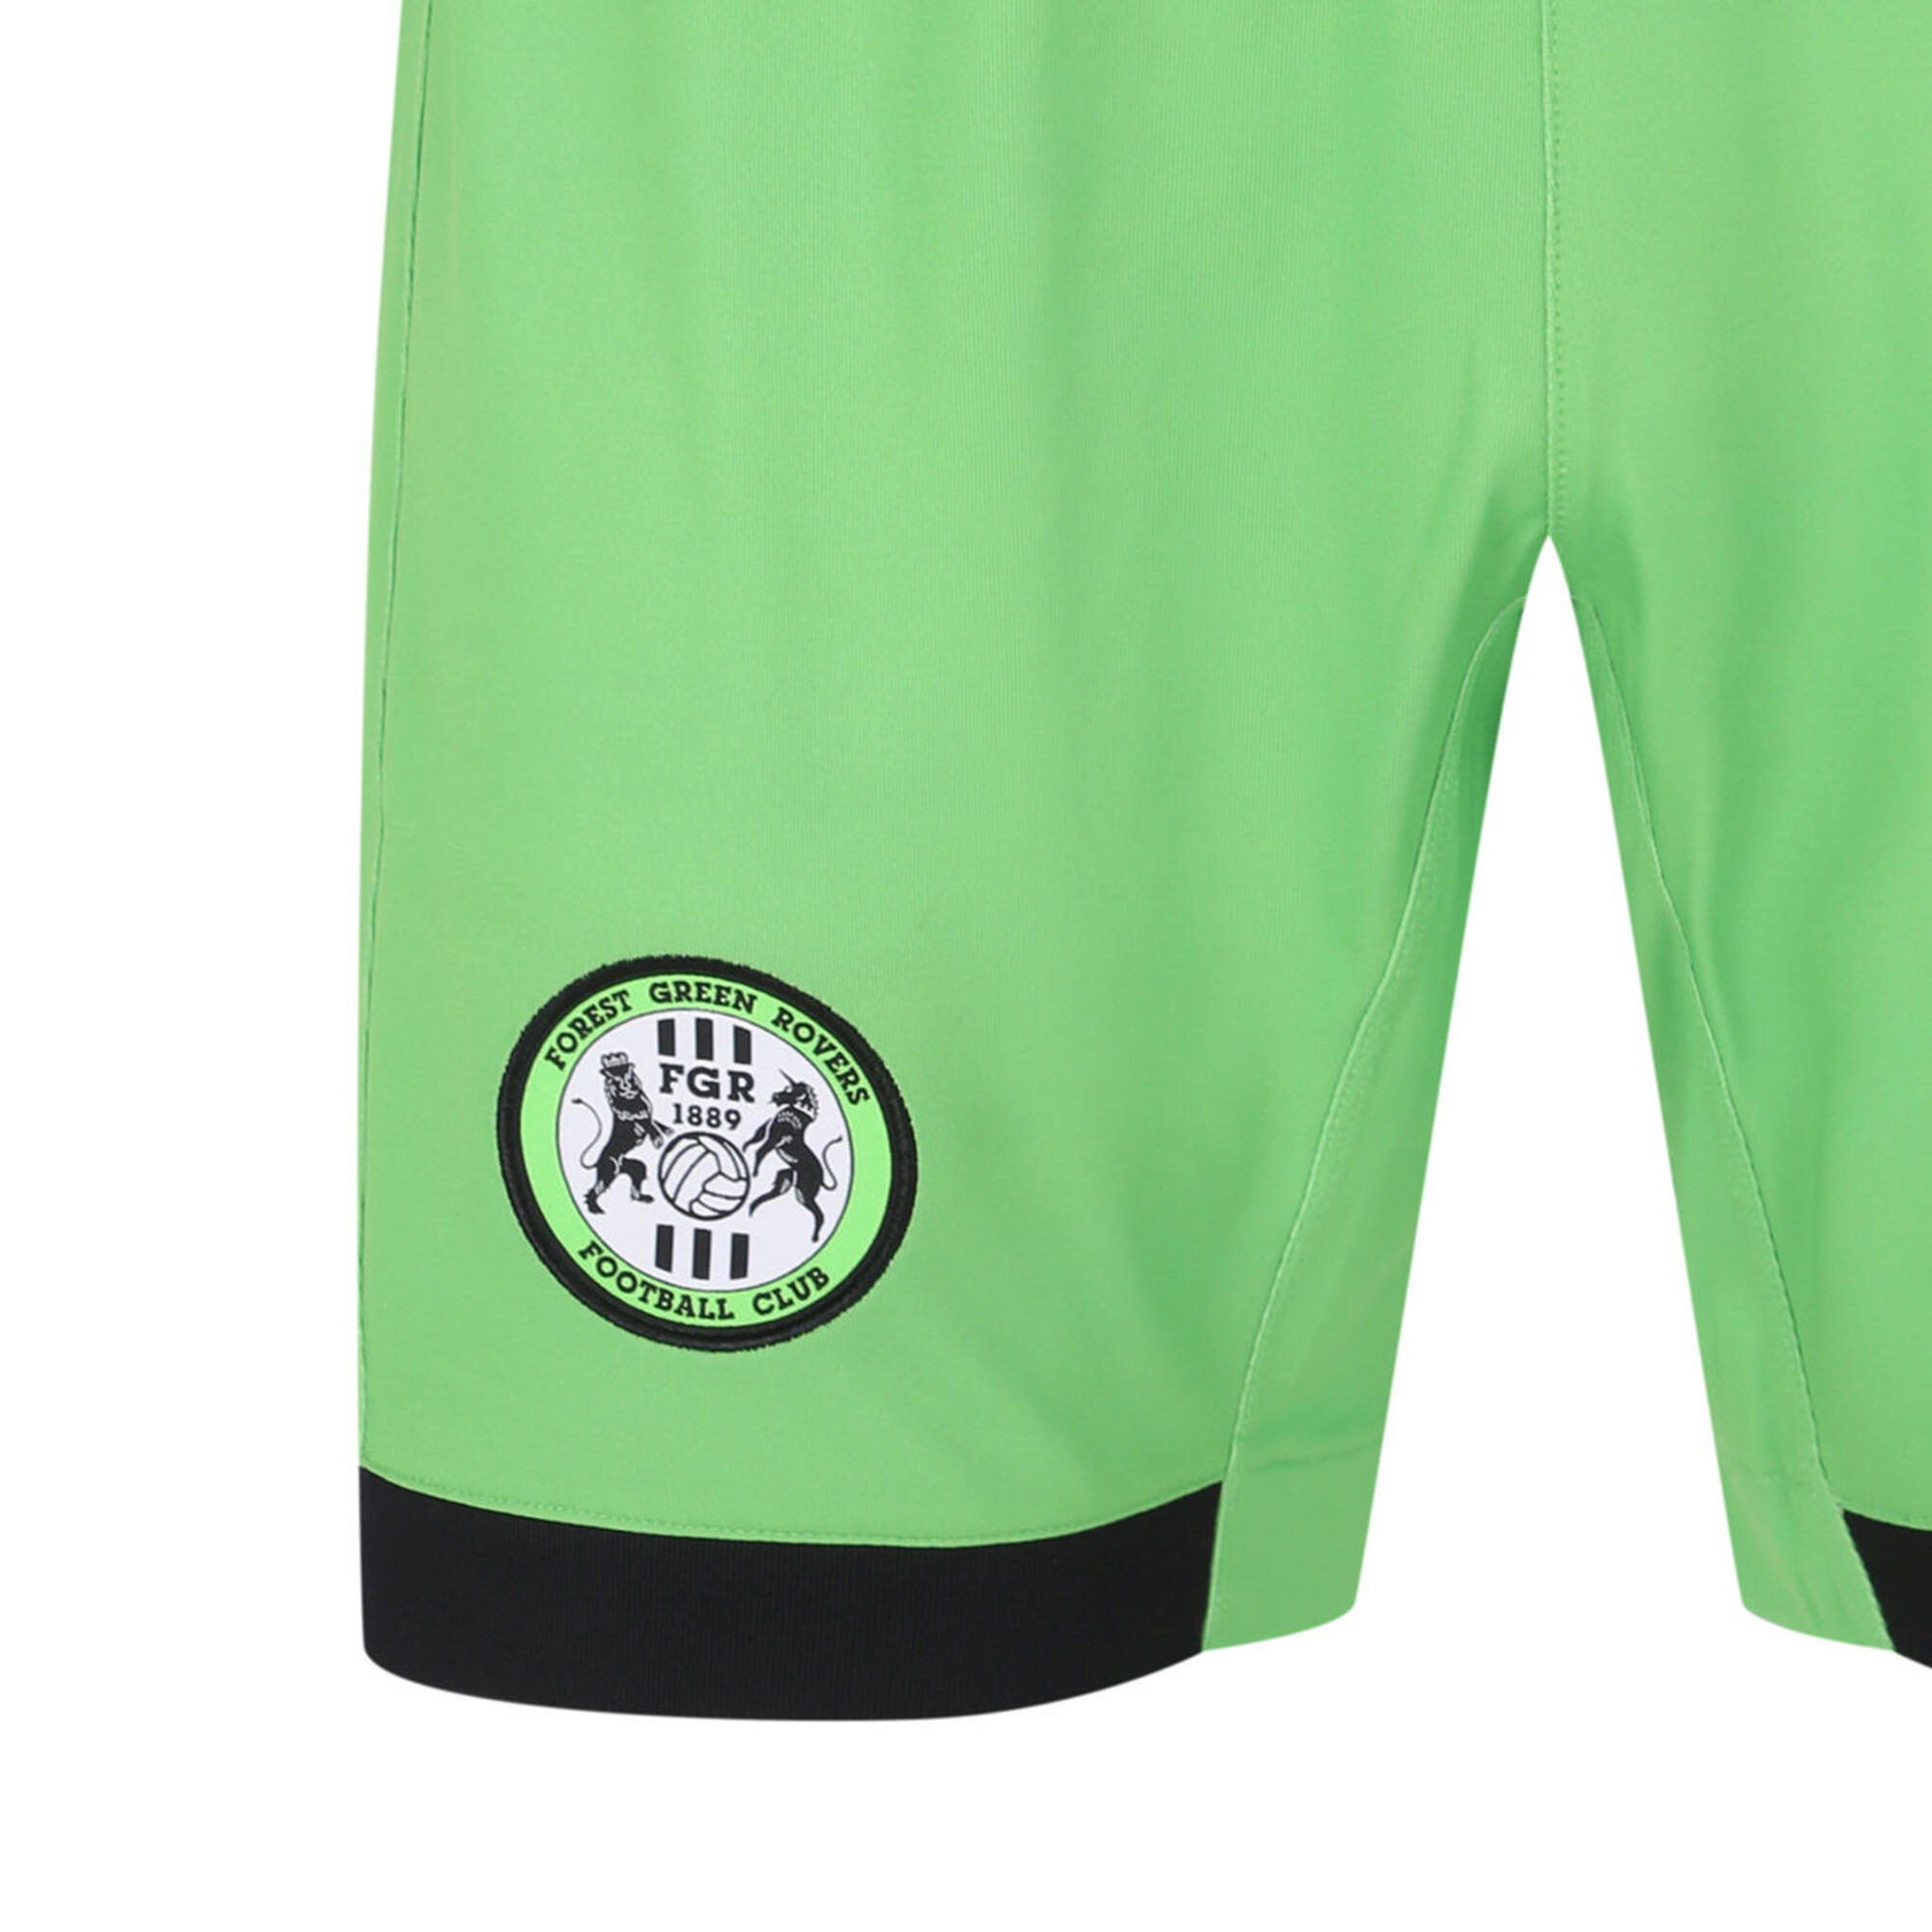 Mens 23/24 Forest Green Rovers FC Home Shorts (Green/Black) 3/3